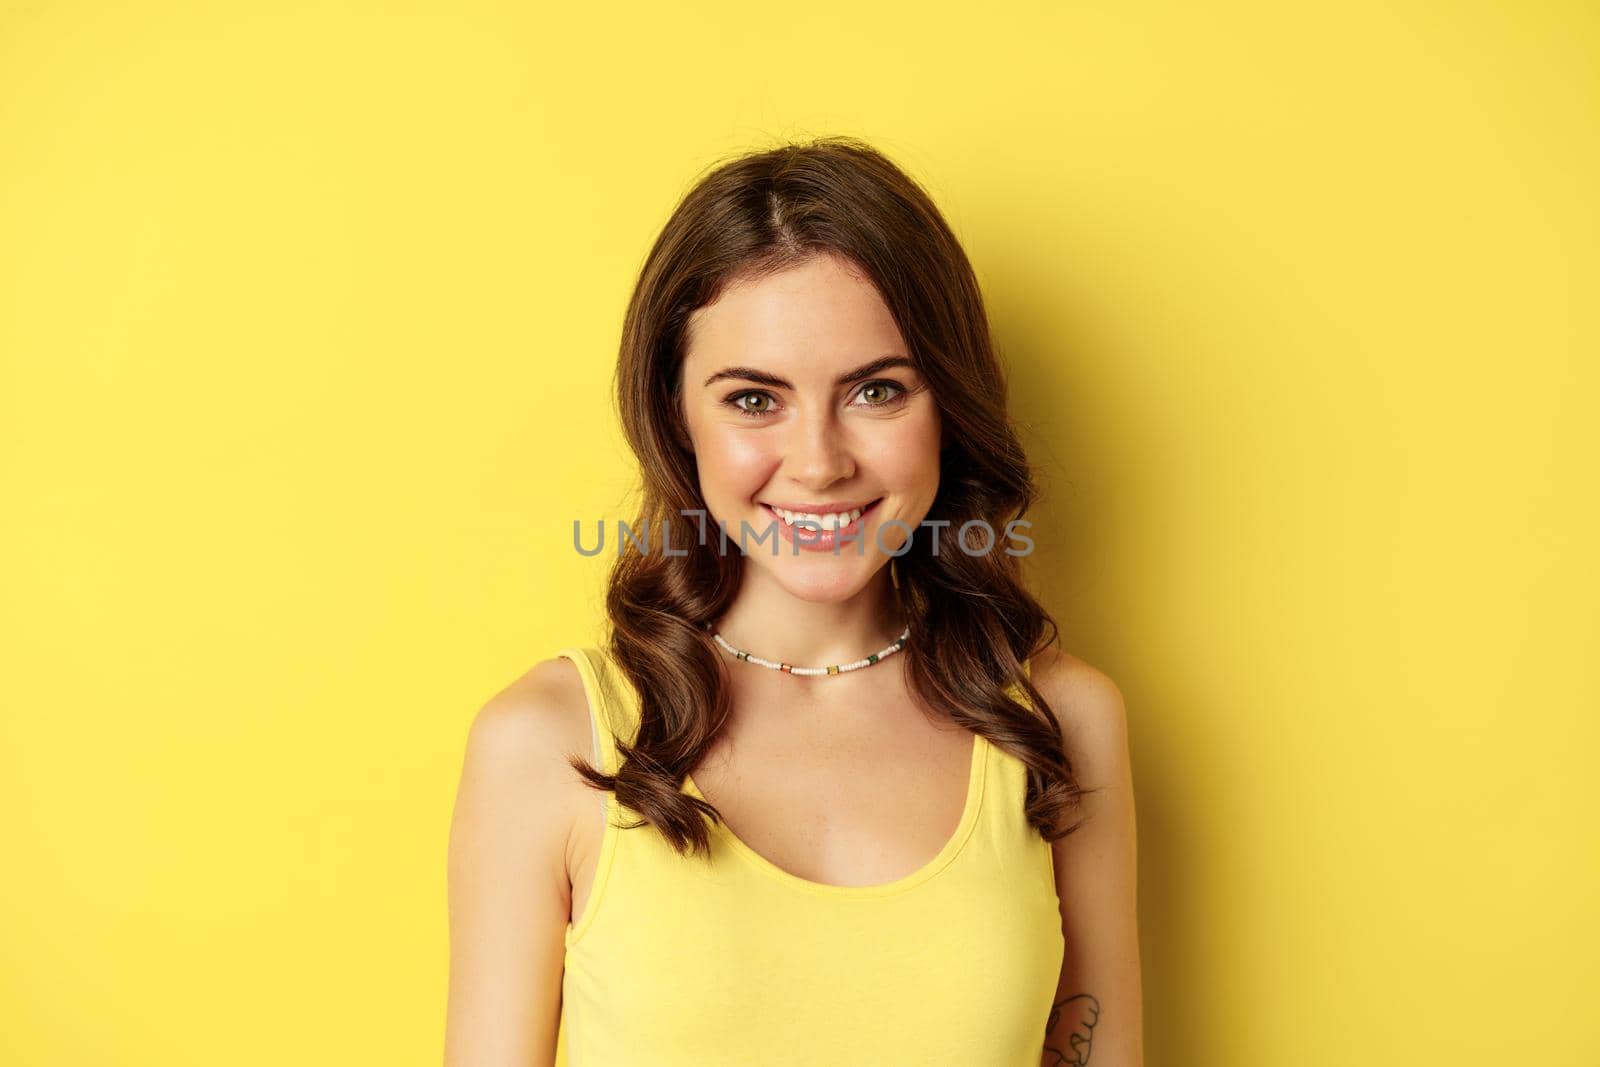 Close up portrait of brunette woman with healthy white smile, looking happy and confident, posing against yellow background.